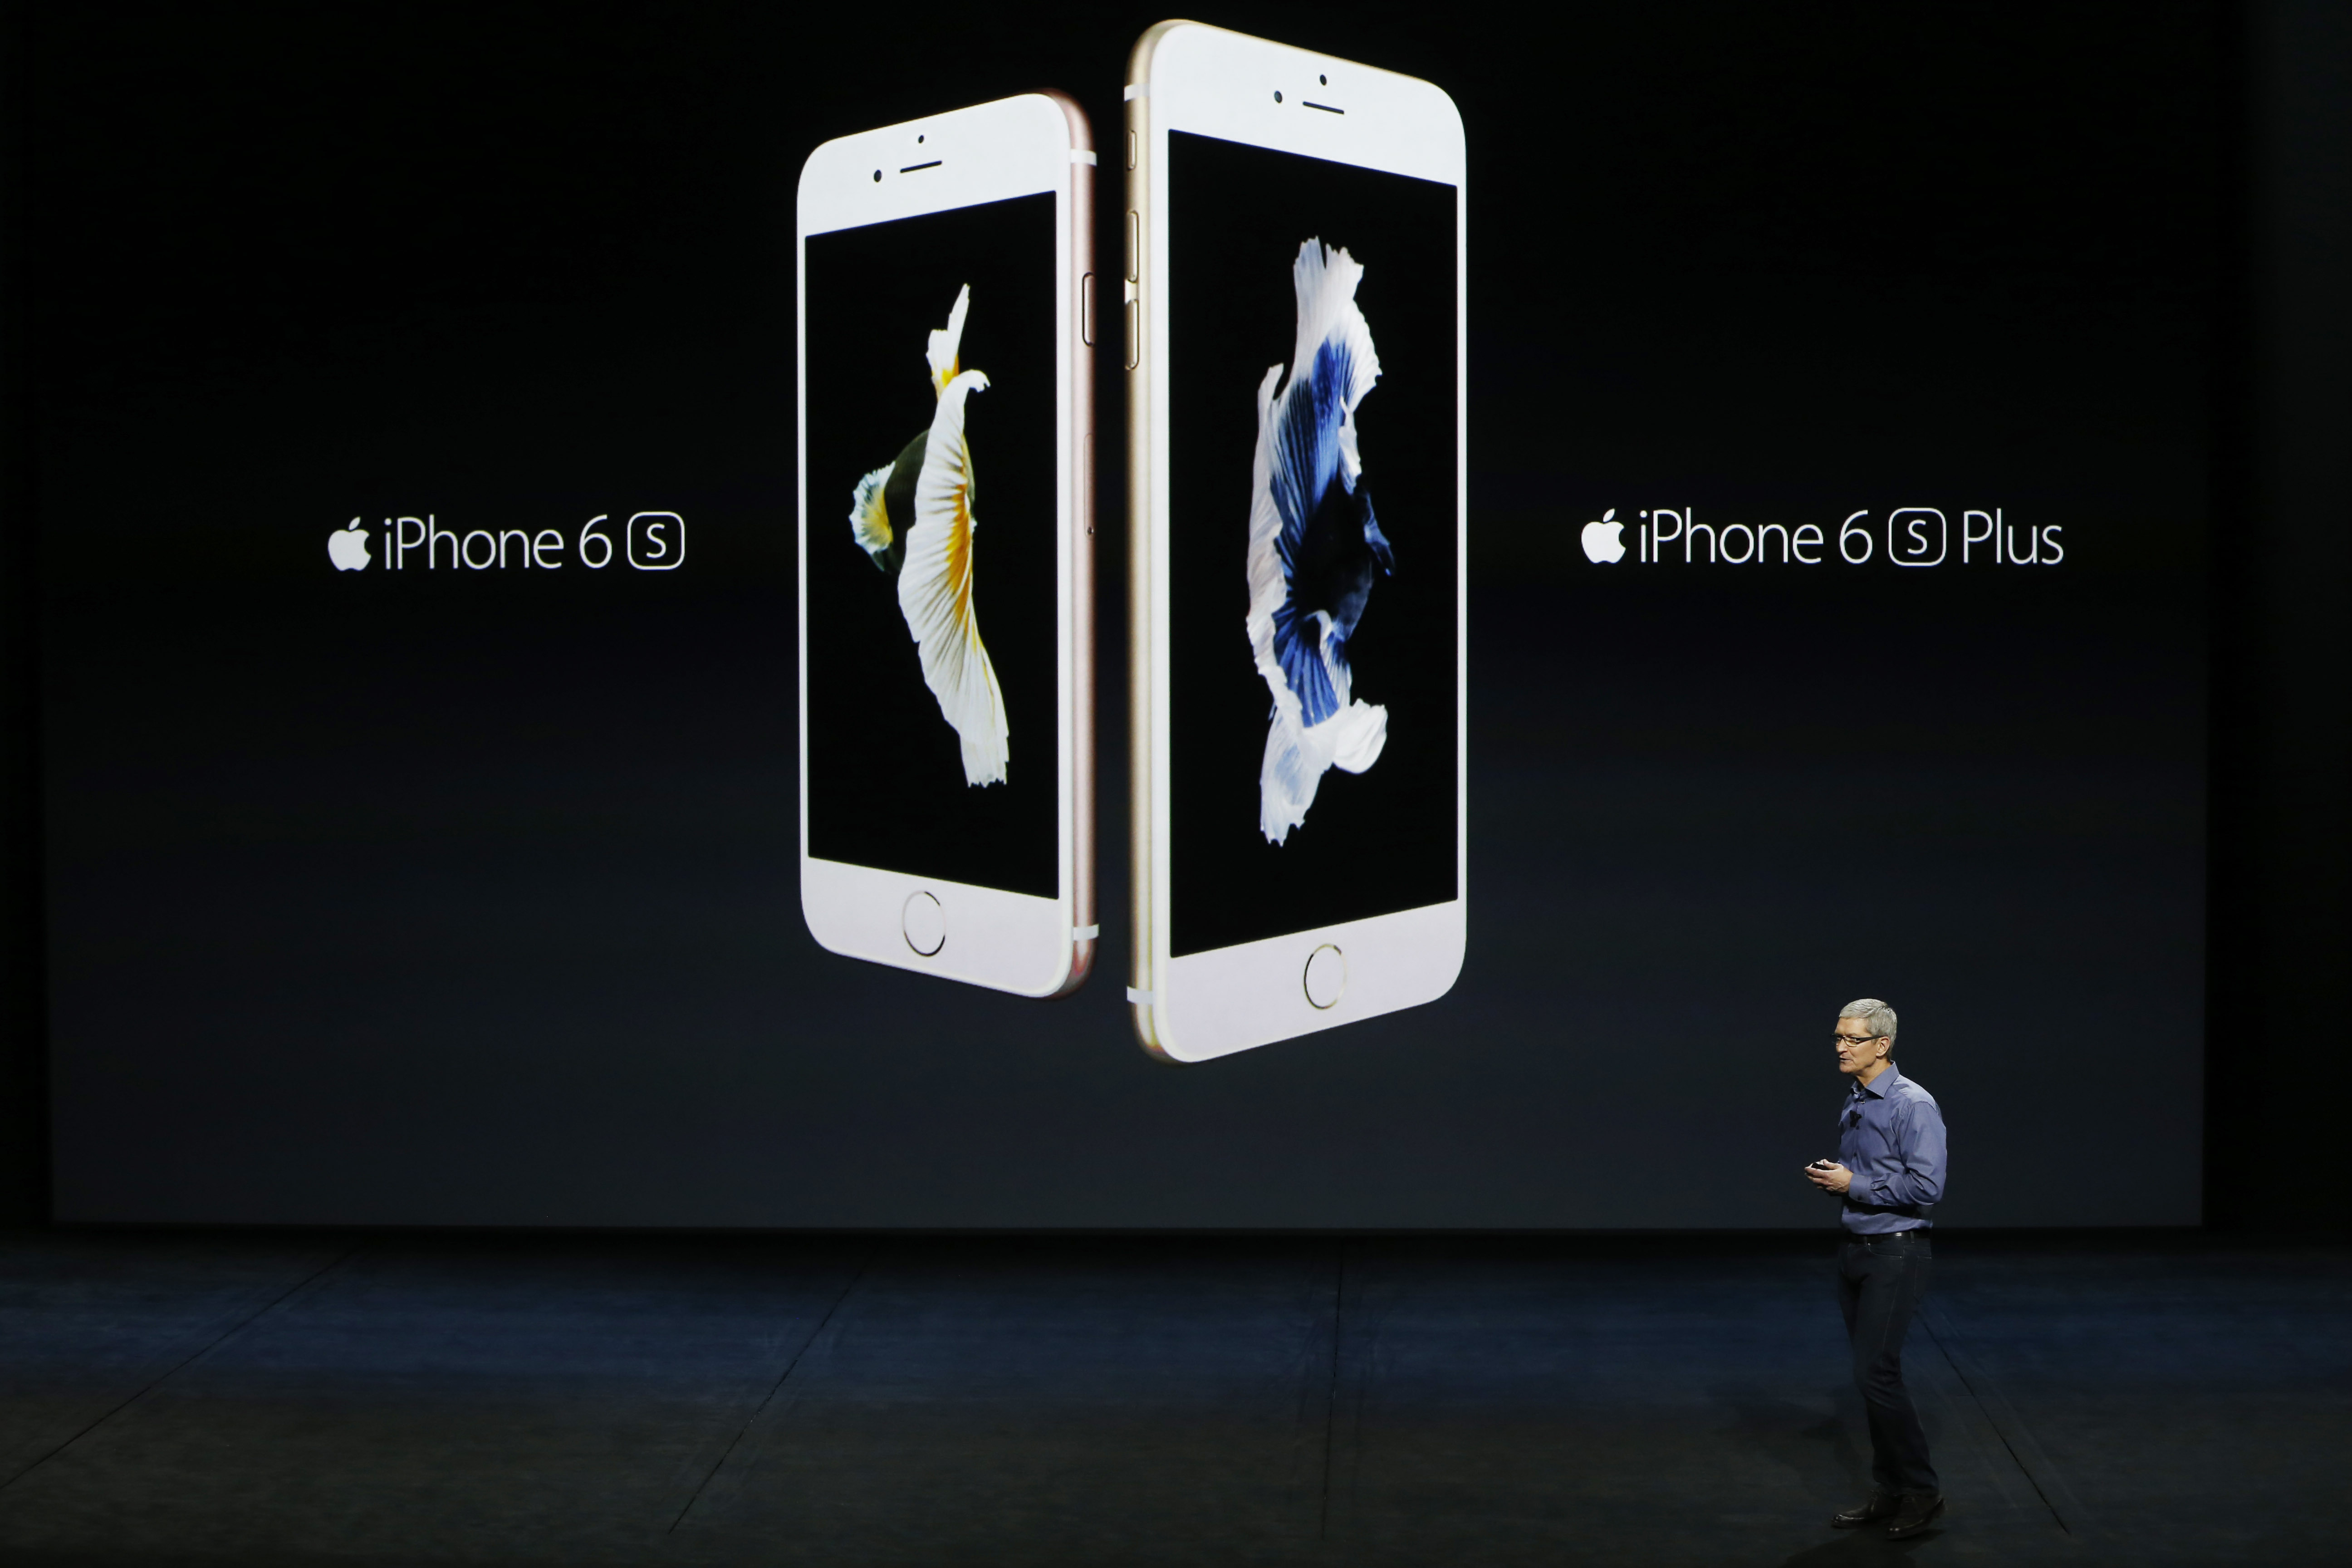 Apple Unveils New Versions Of iPhone 6, Apple TV